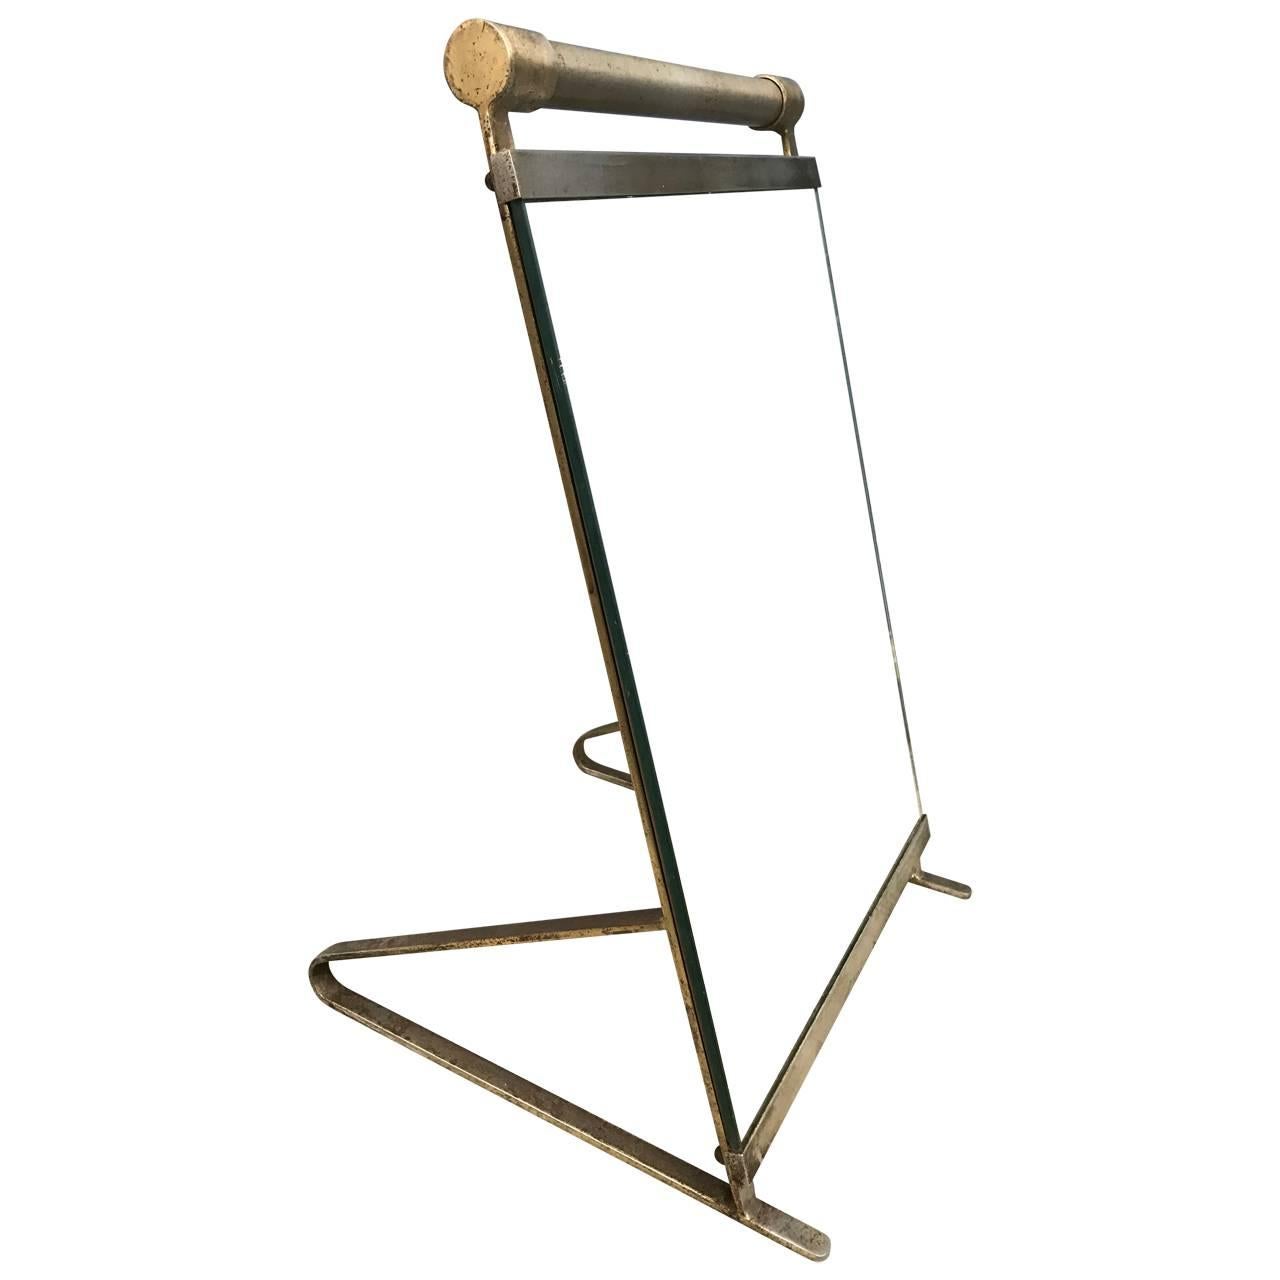 Great little addition to any well-equipped dressing room. Brass finish is in original brushed patina.